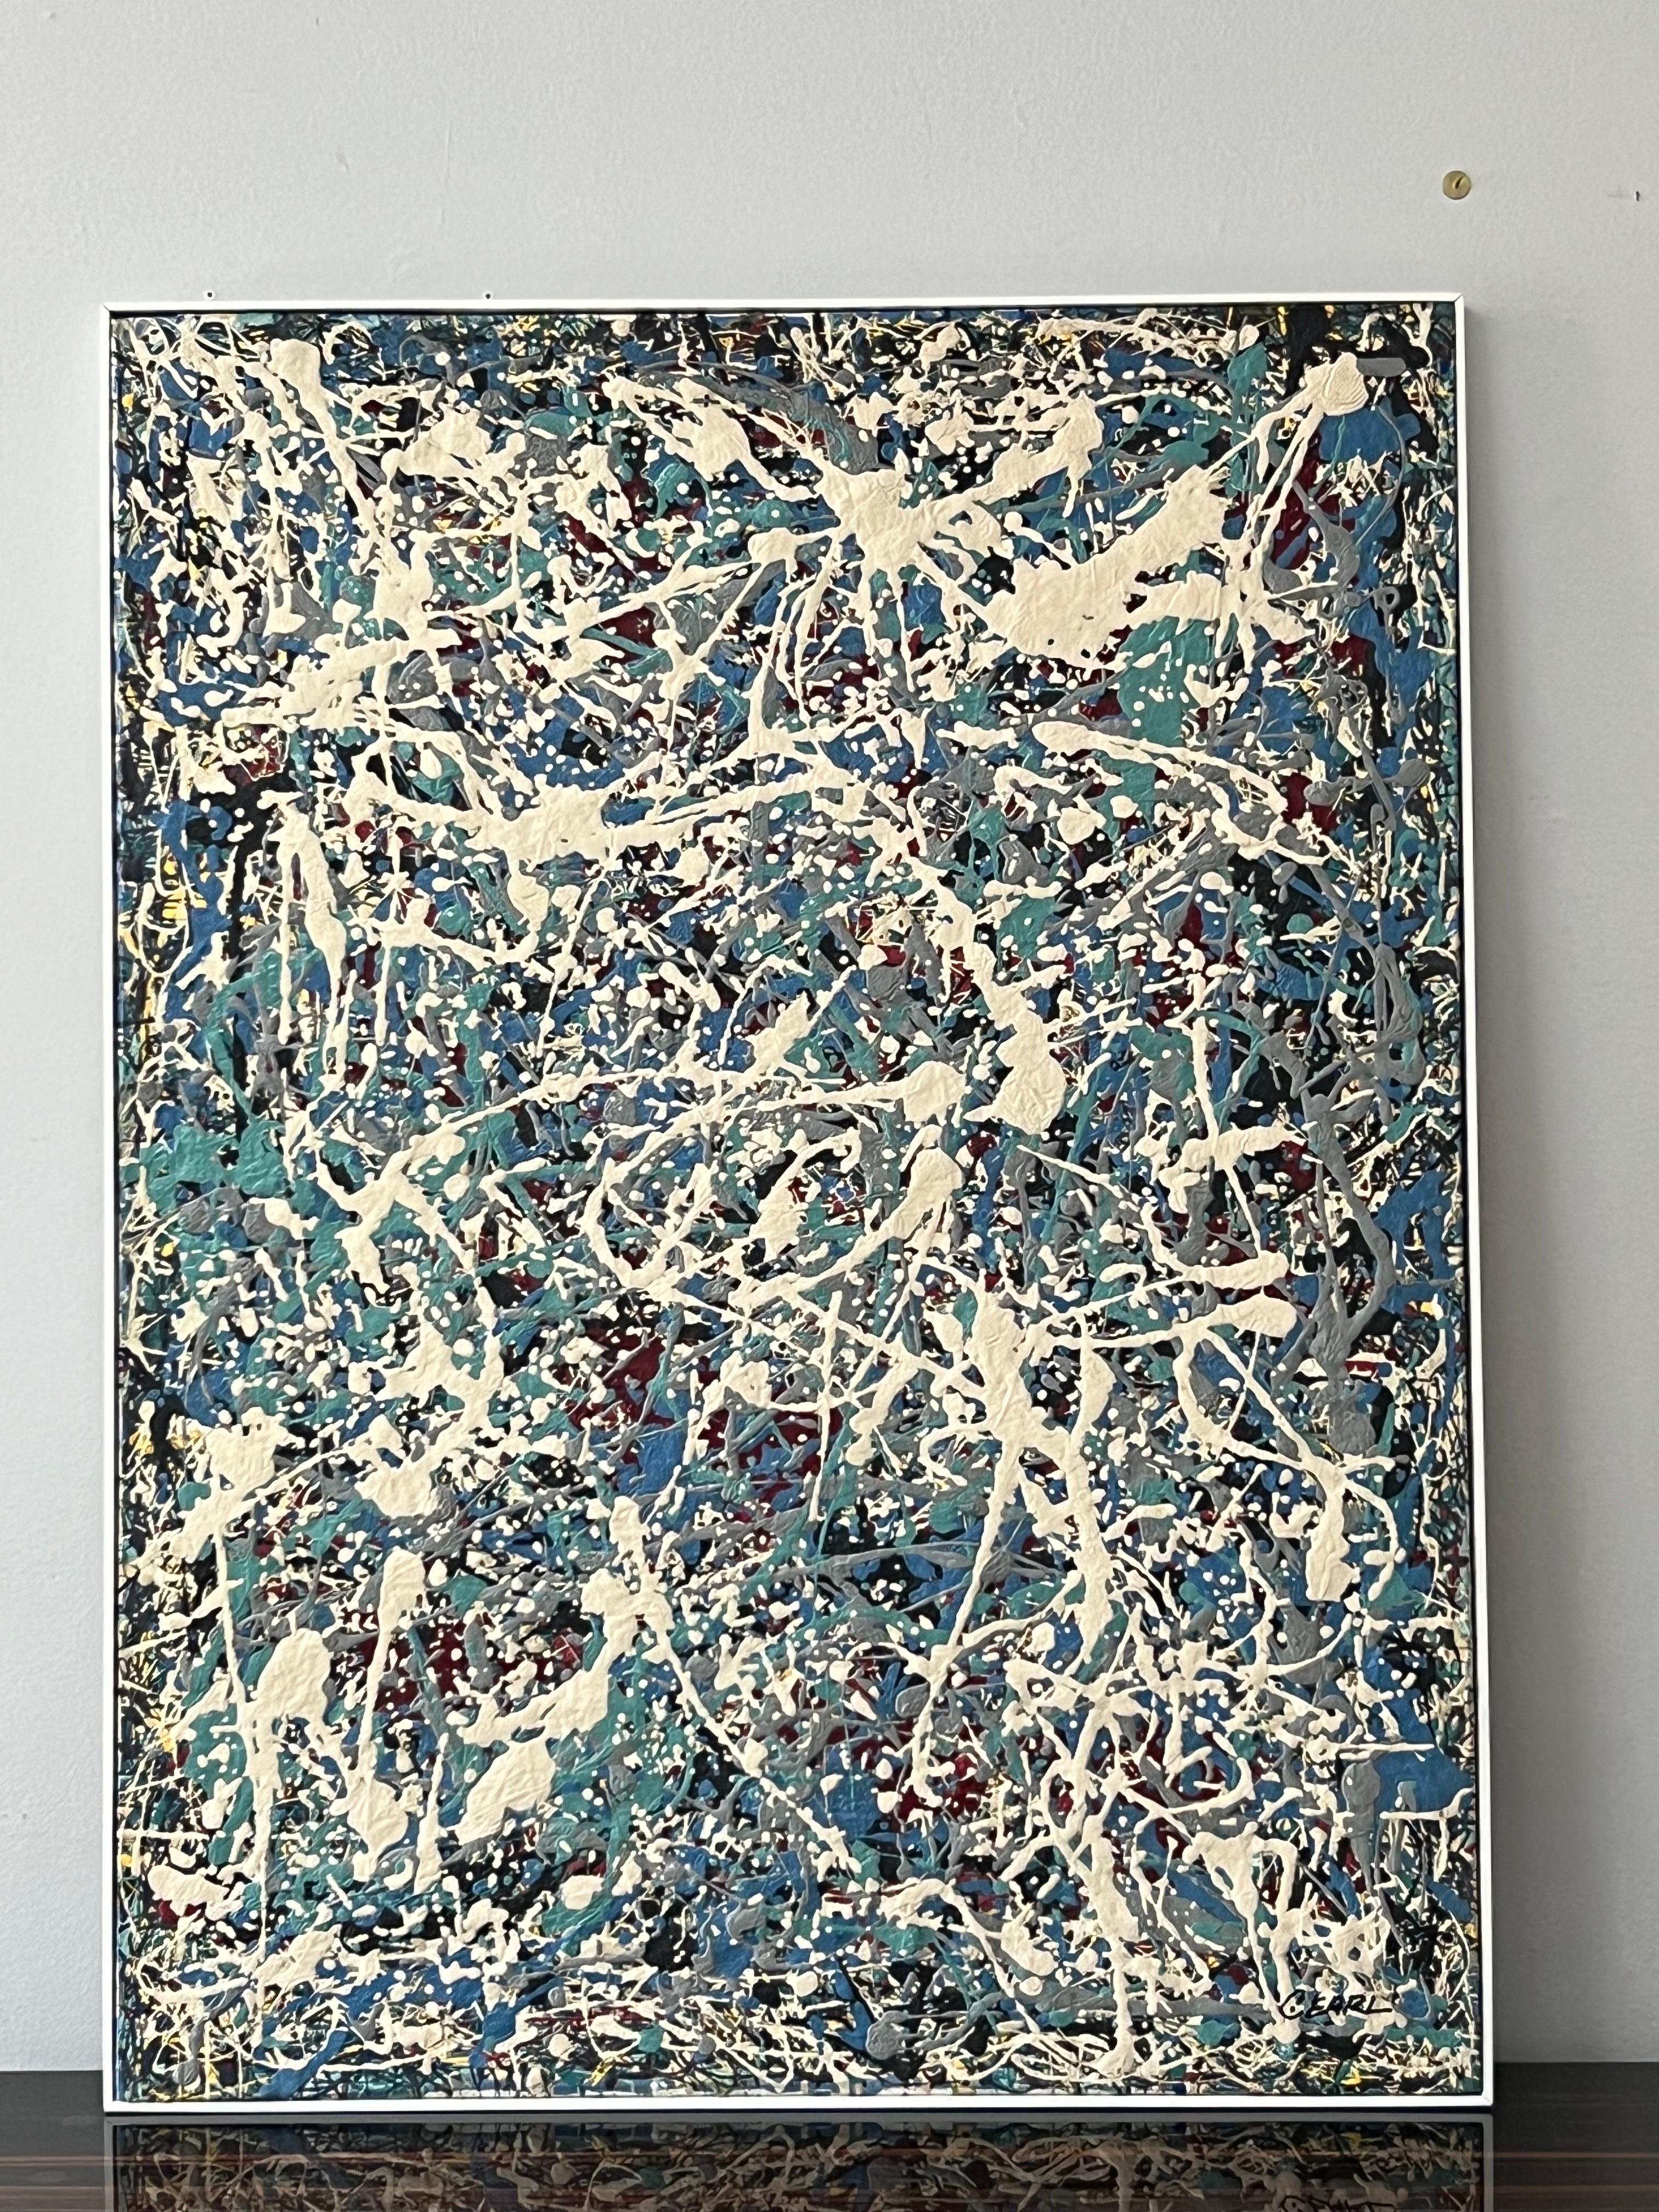 American Abstract Expressionist Drip Oil Painting Manner of Jackson Pollock by C. Earl For Sale